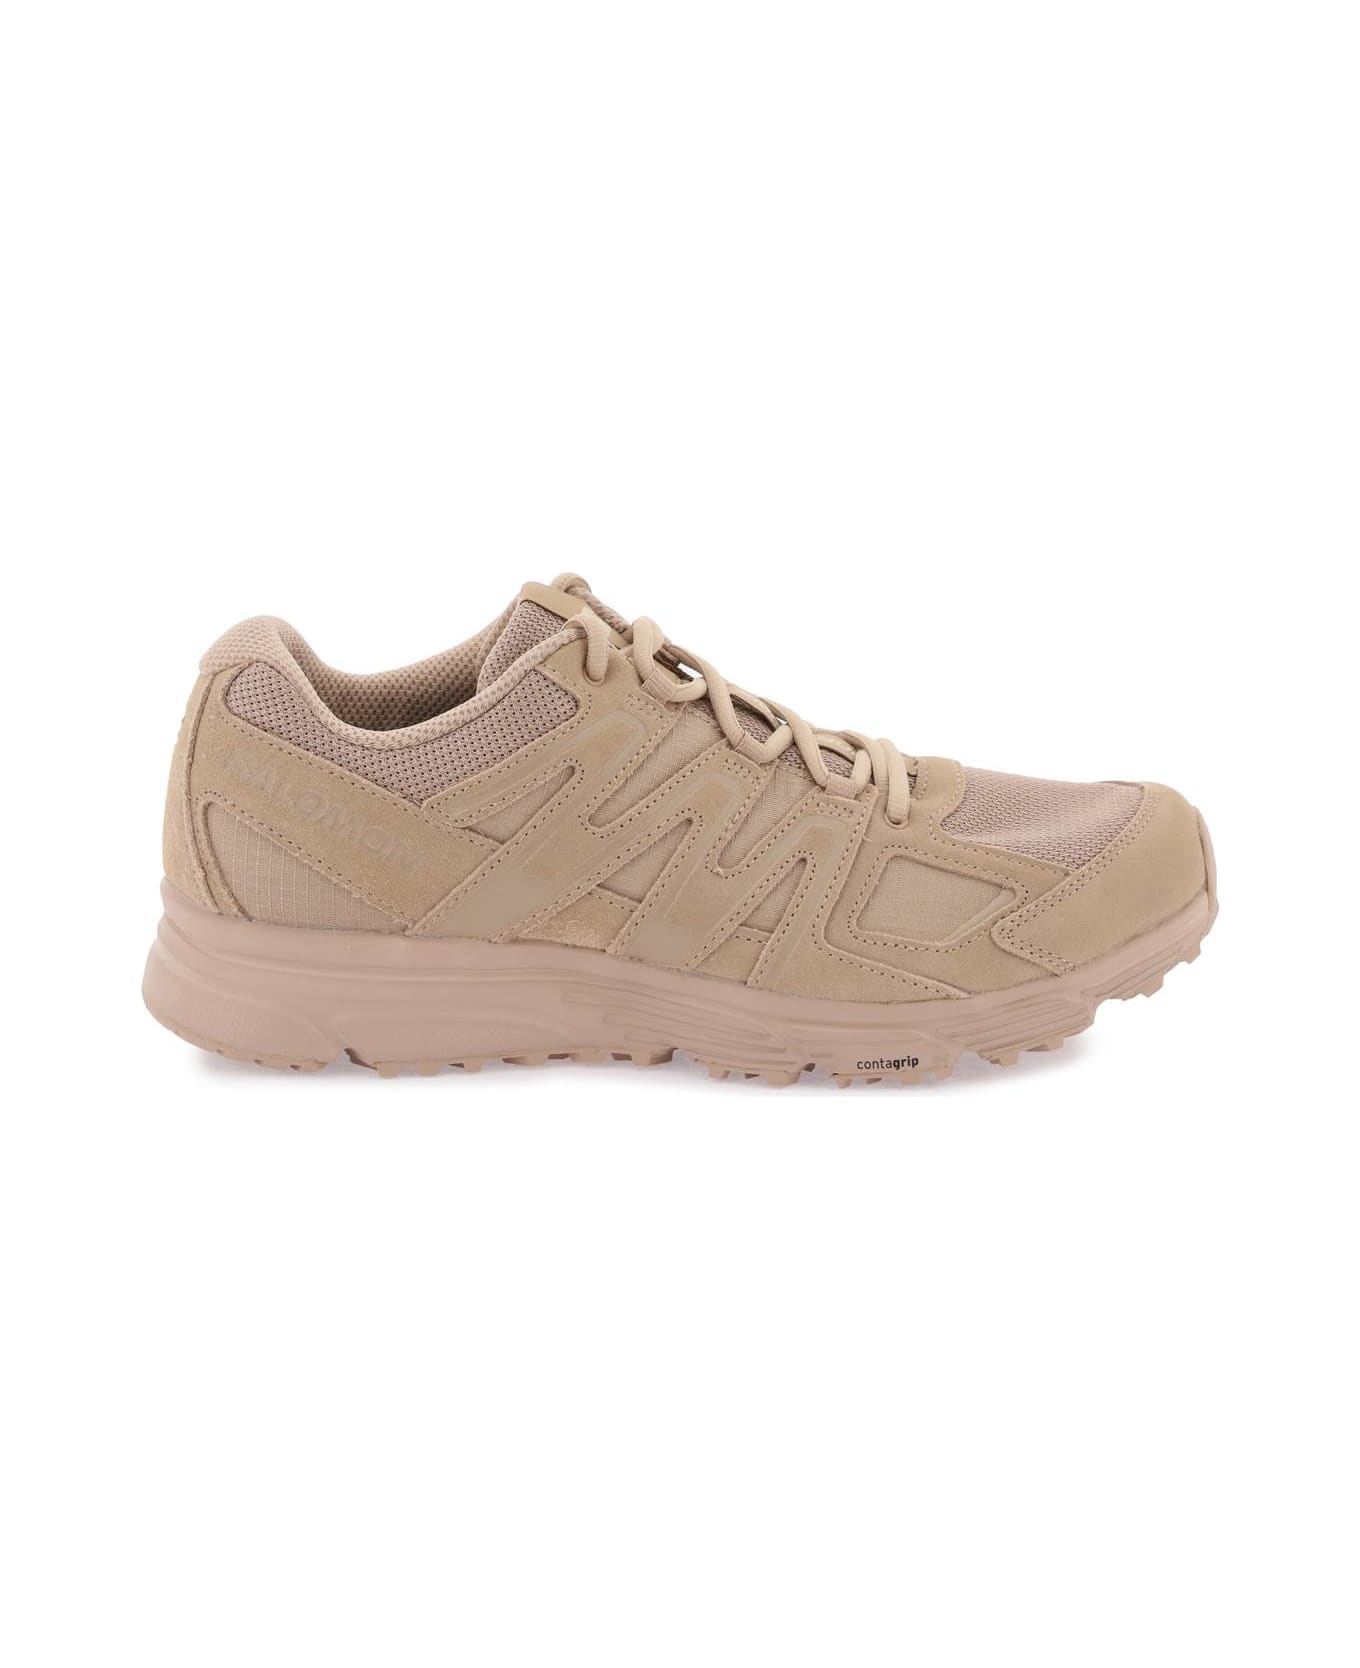 Salomon X-mission 4 Suede Sneakers - NATURAL NATURAL NATURAL (Pink) スニーカー